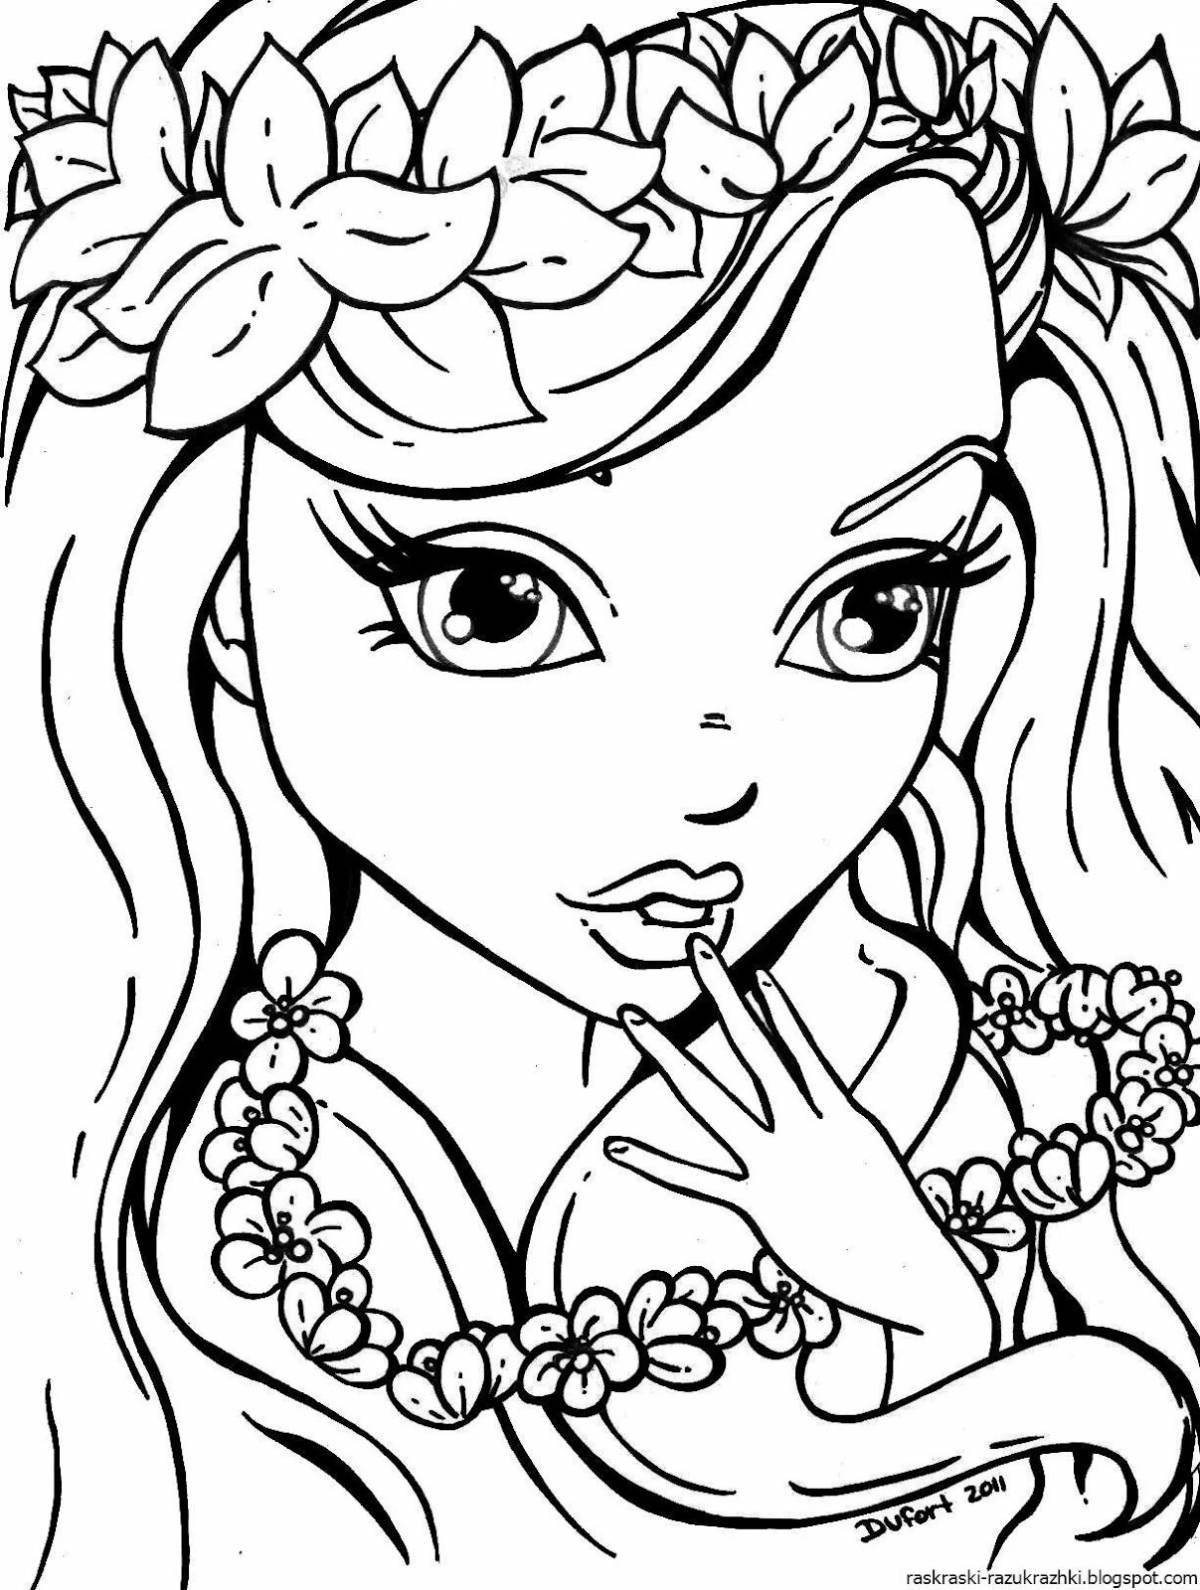 Miss tee coloring page crazy for flowers